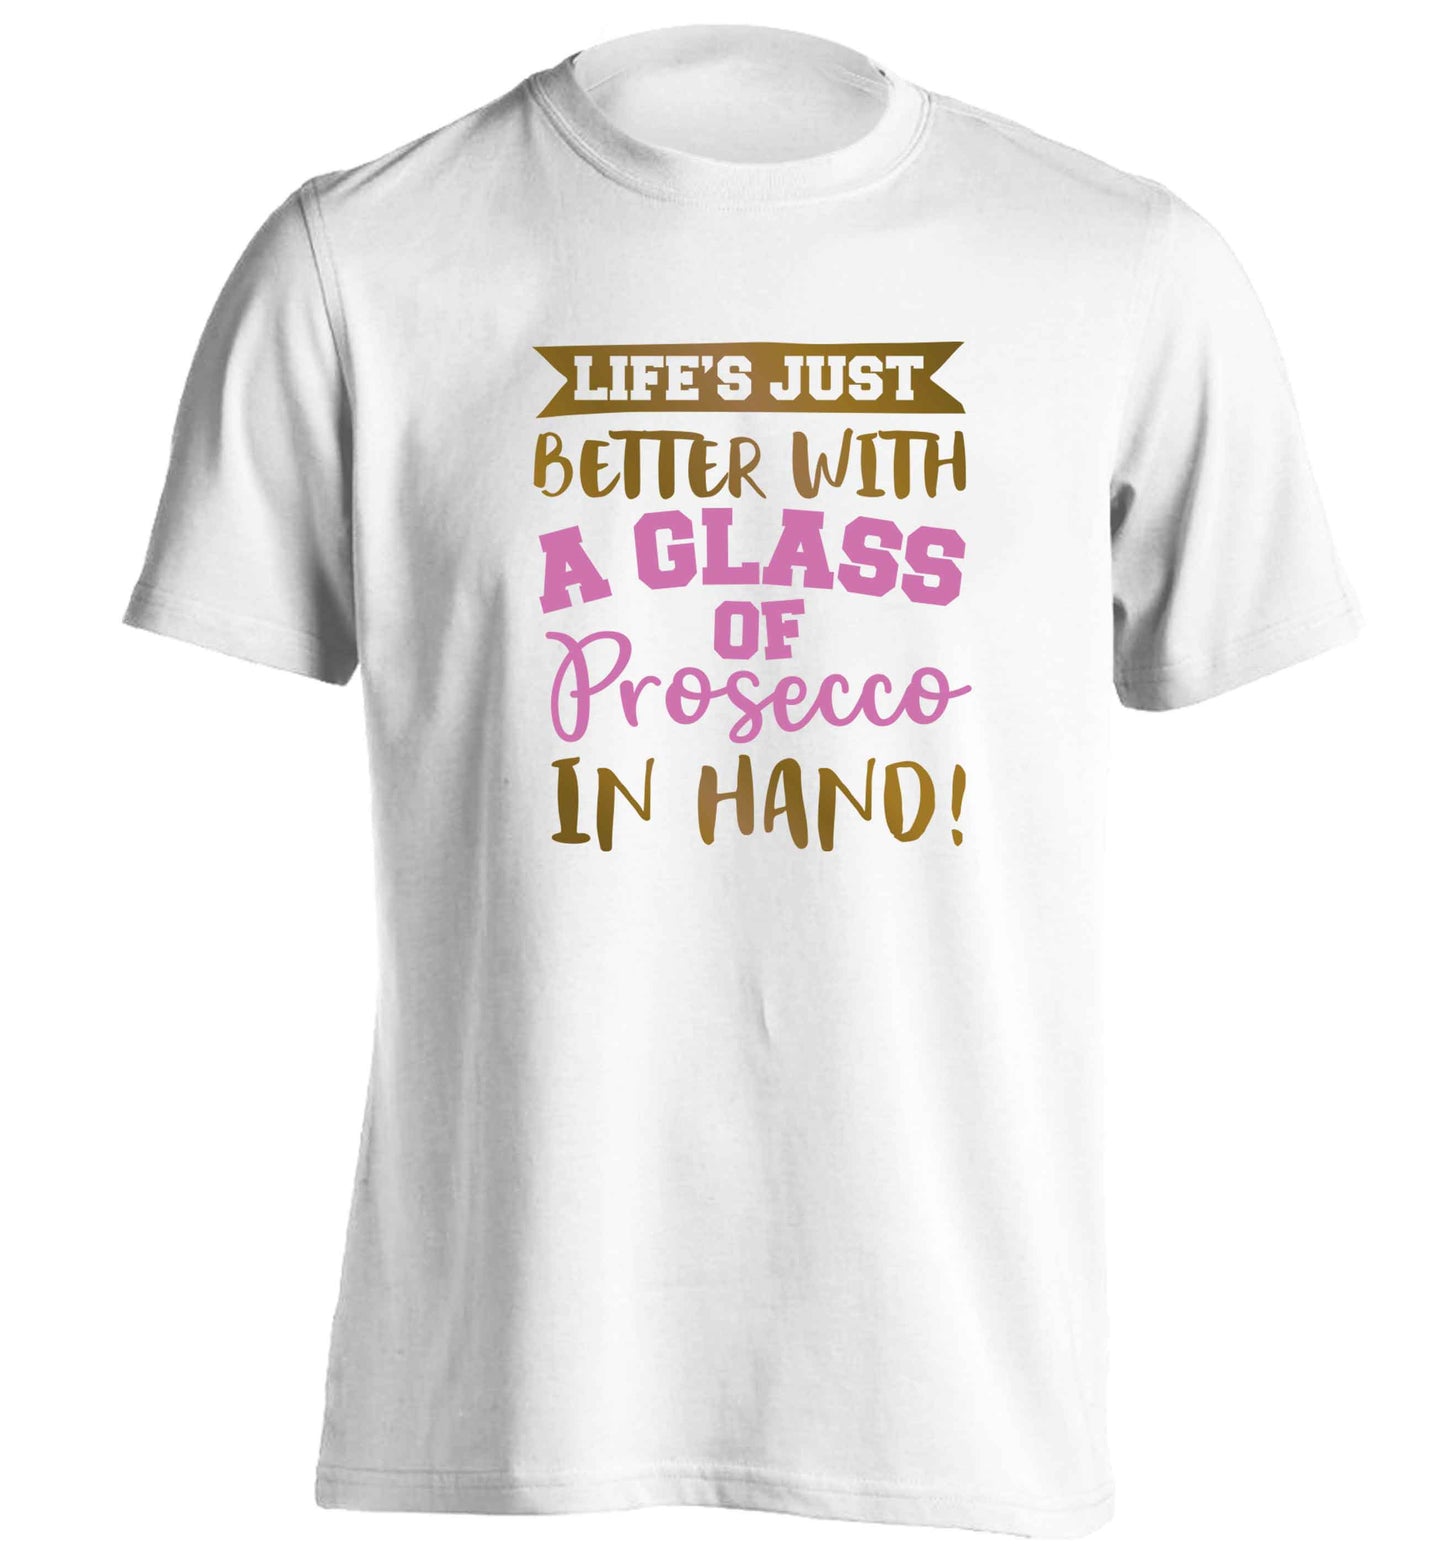 Life's just better with a glass of prosecco in hand adults unisex white Tshirt 2XL